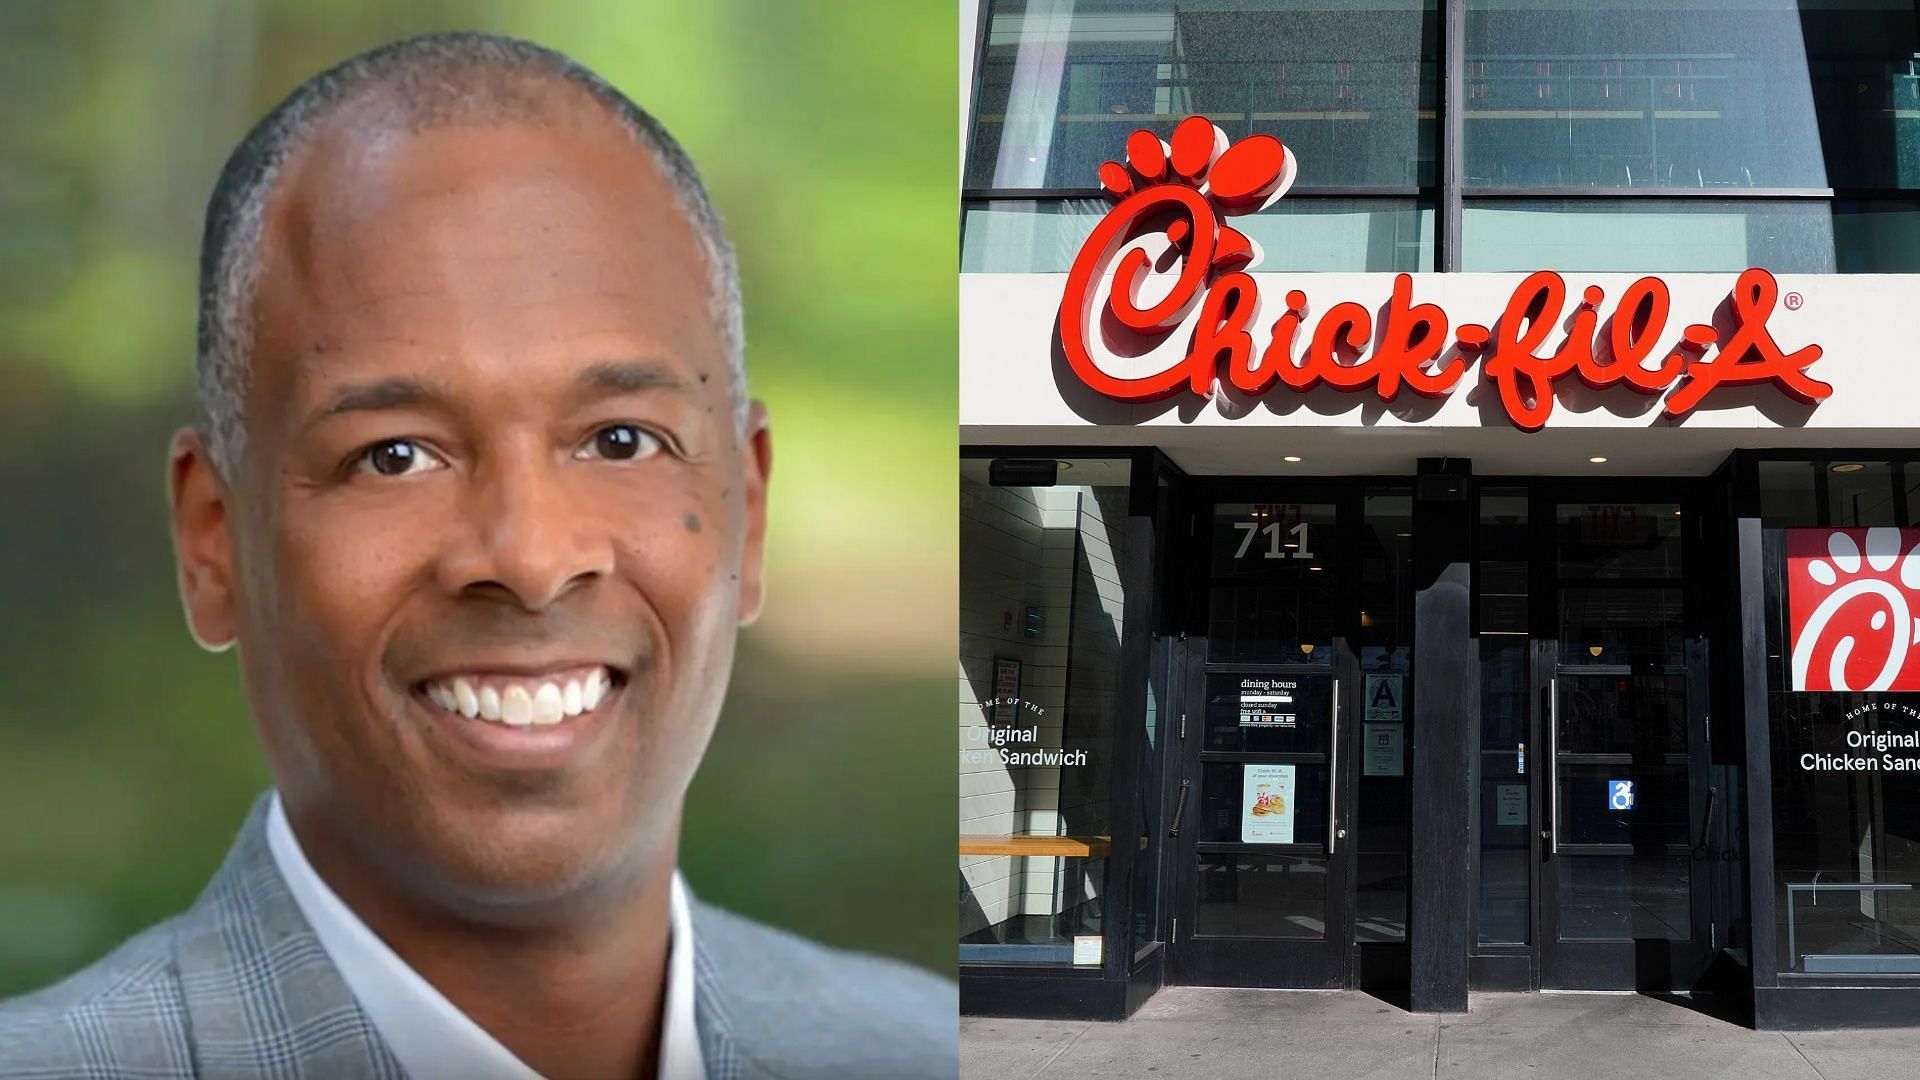 Erick McReynolds, Chick fil a. (Photo via @WFFHQ/Twitter, Getty Images)